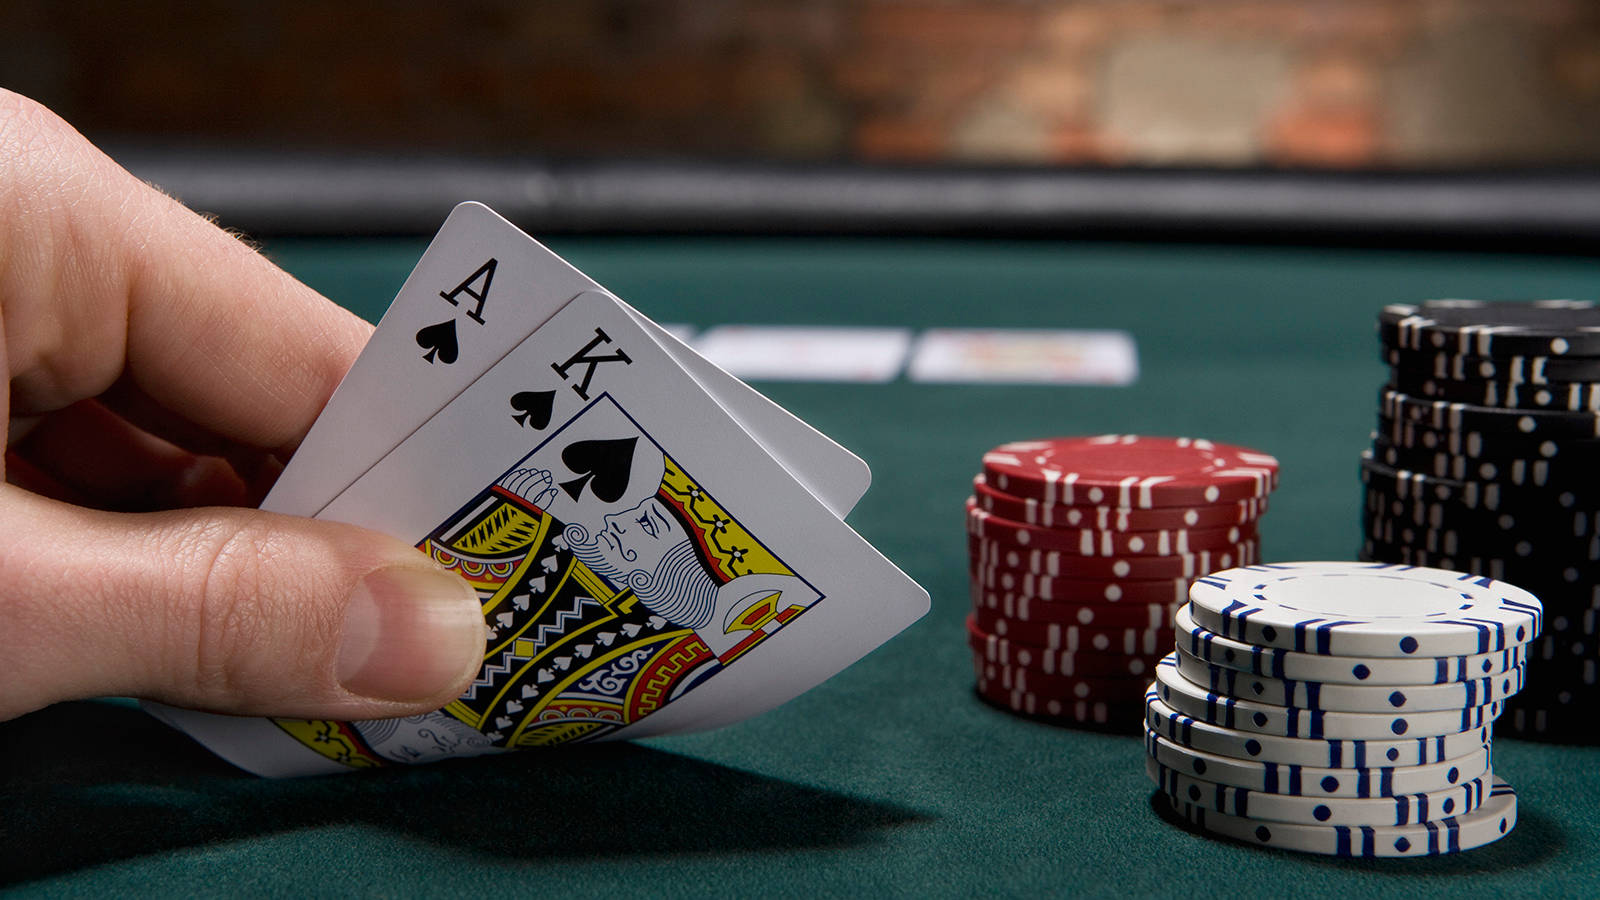 How Much Is An Ace Worth In Blackjack